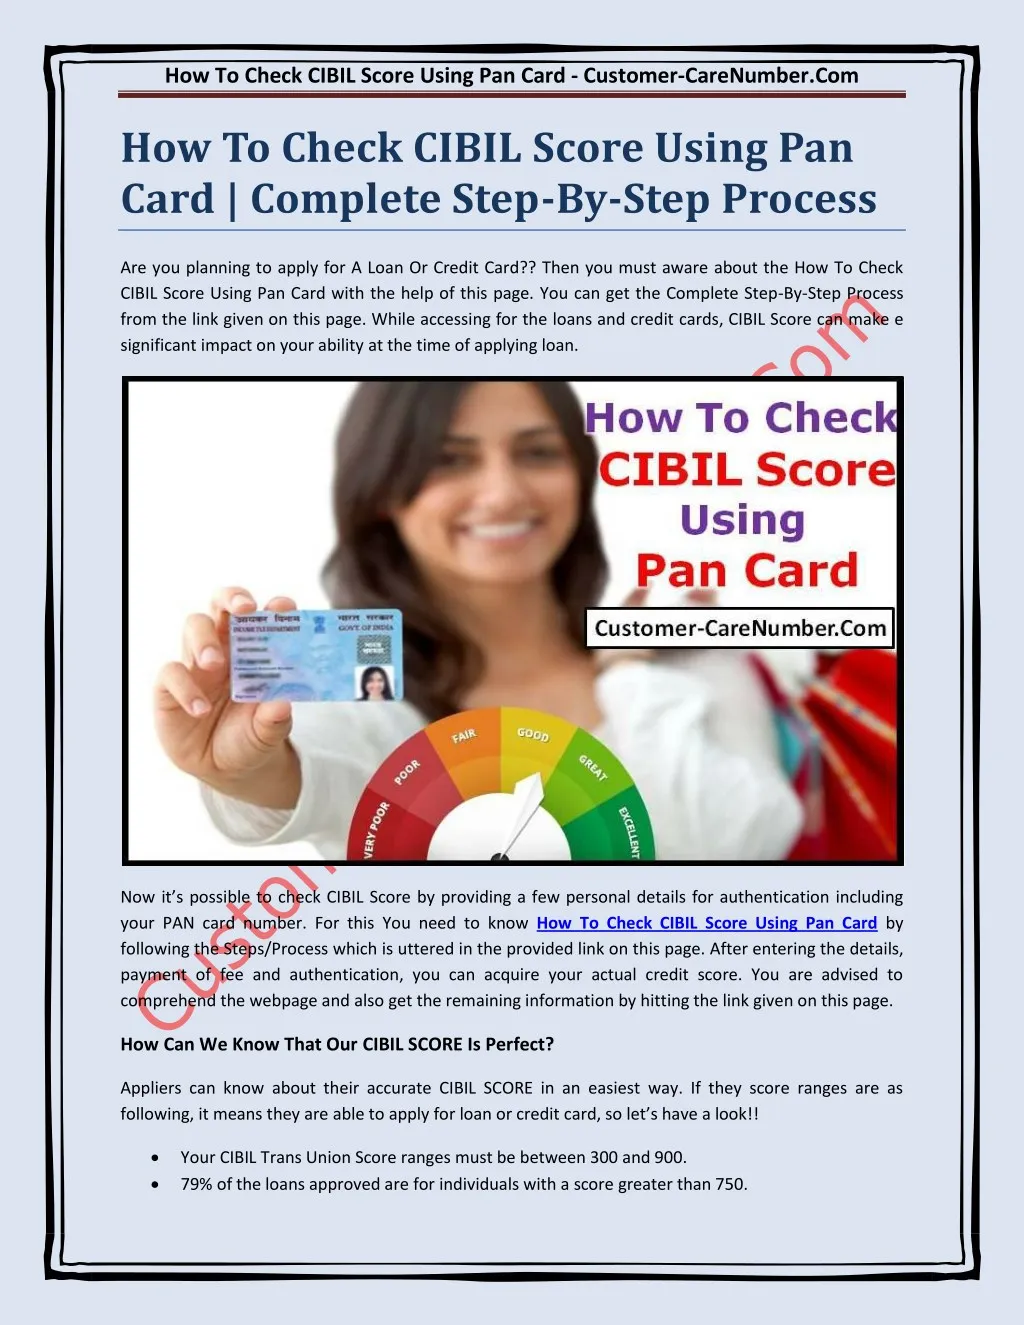 how to check cibil score using pan card customer